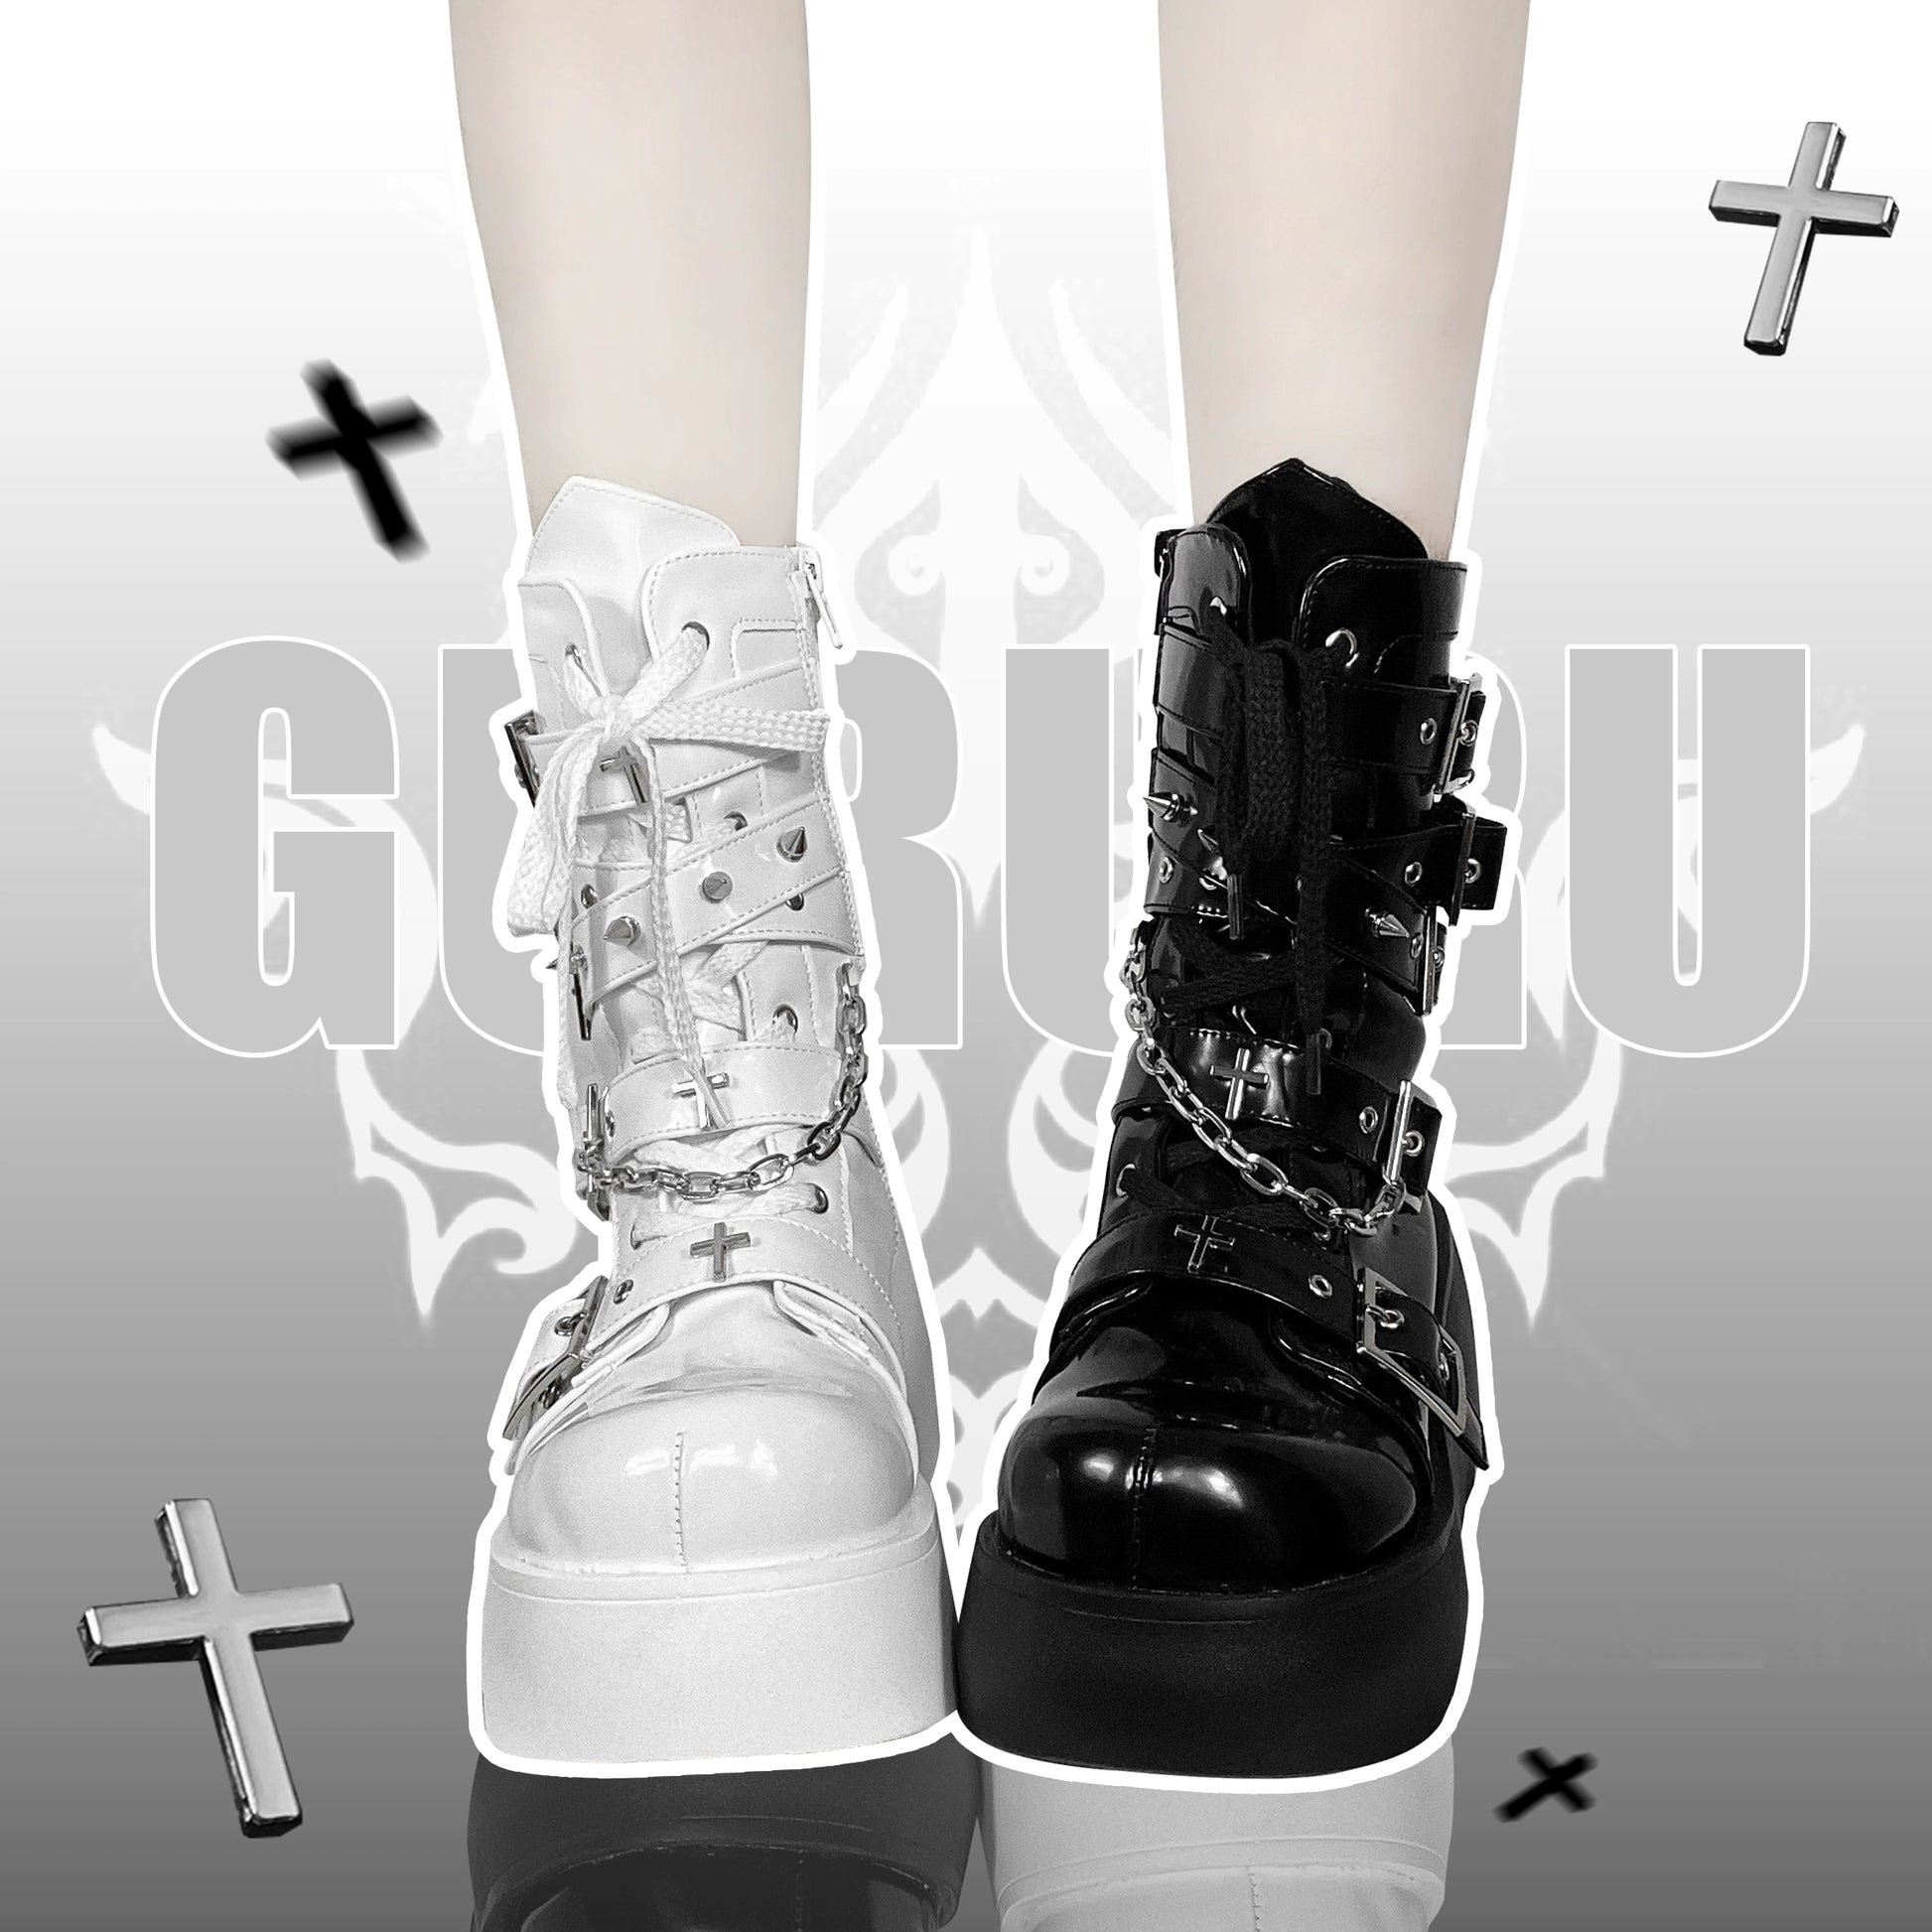 Y2K Spicy Girl Cross Black White Platform Shoes Boots 28962:343854